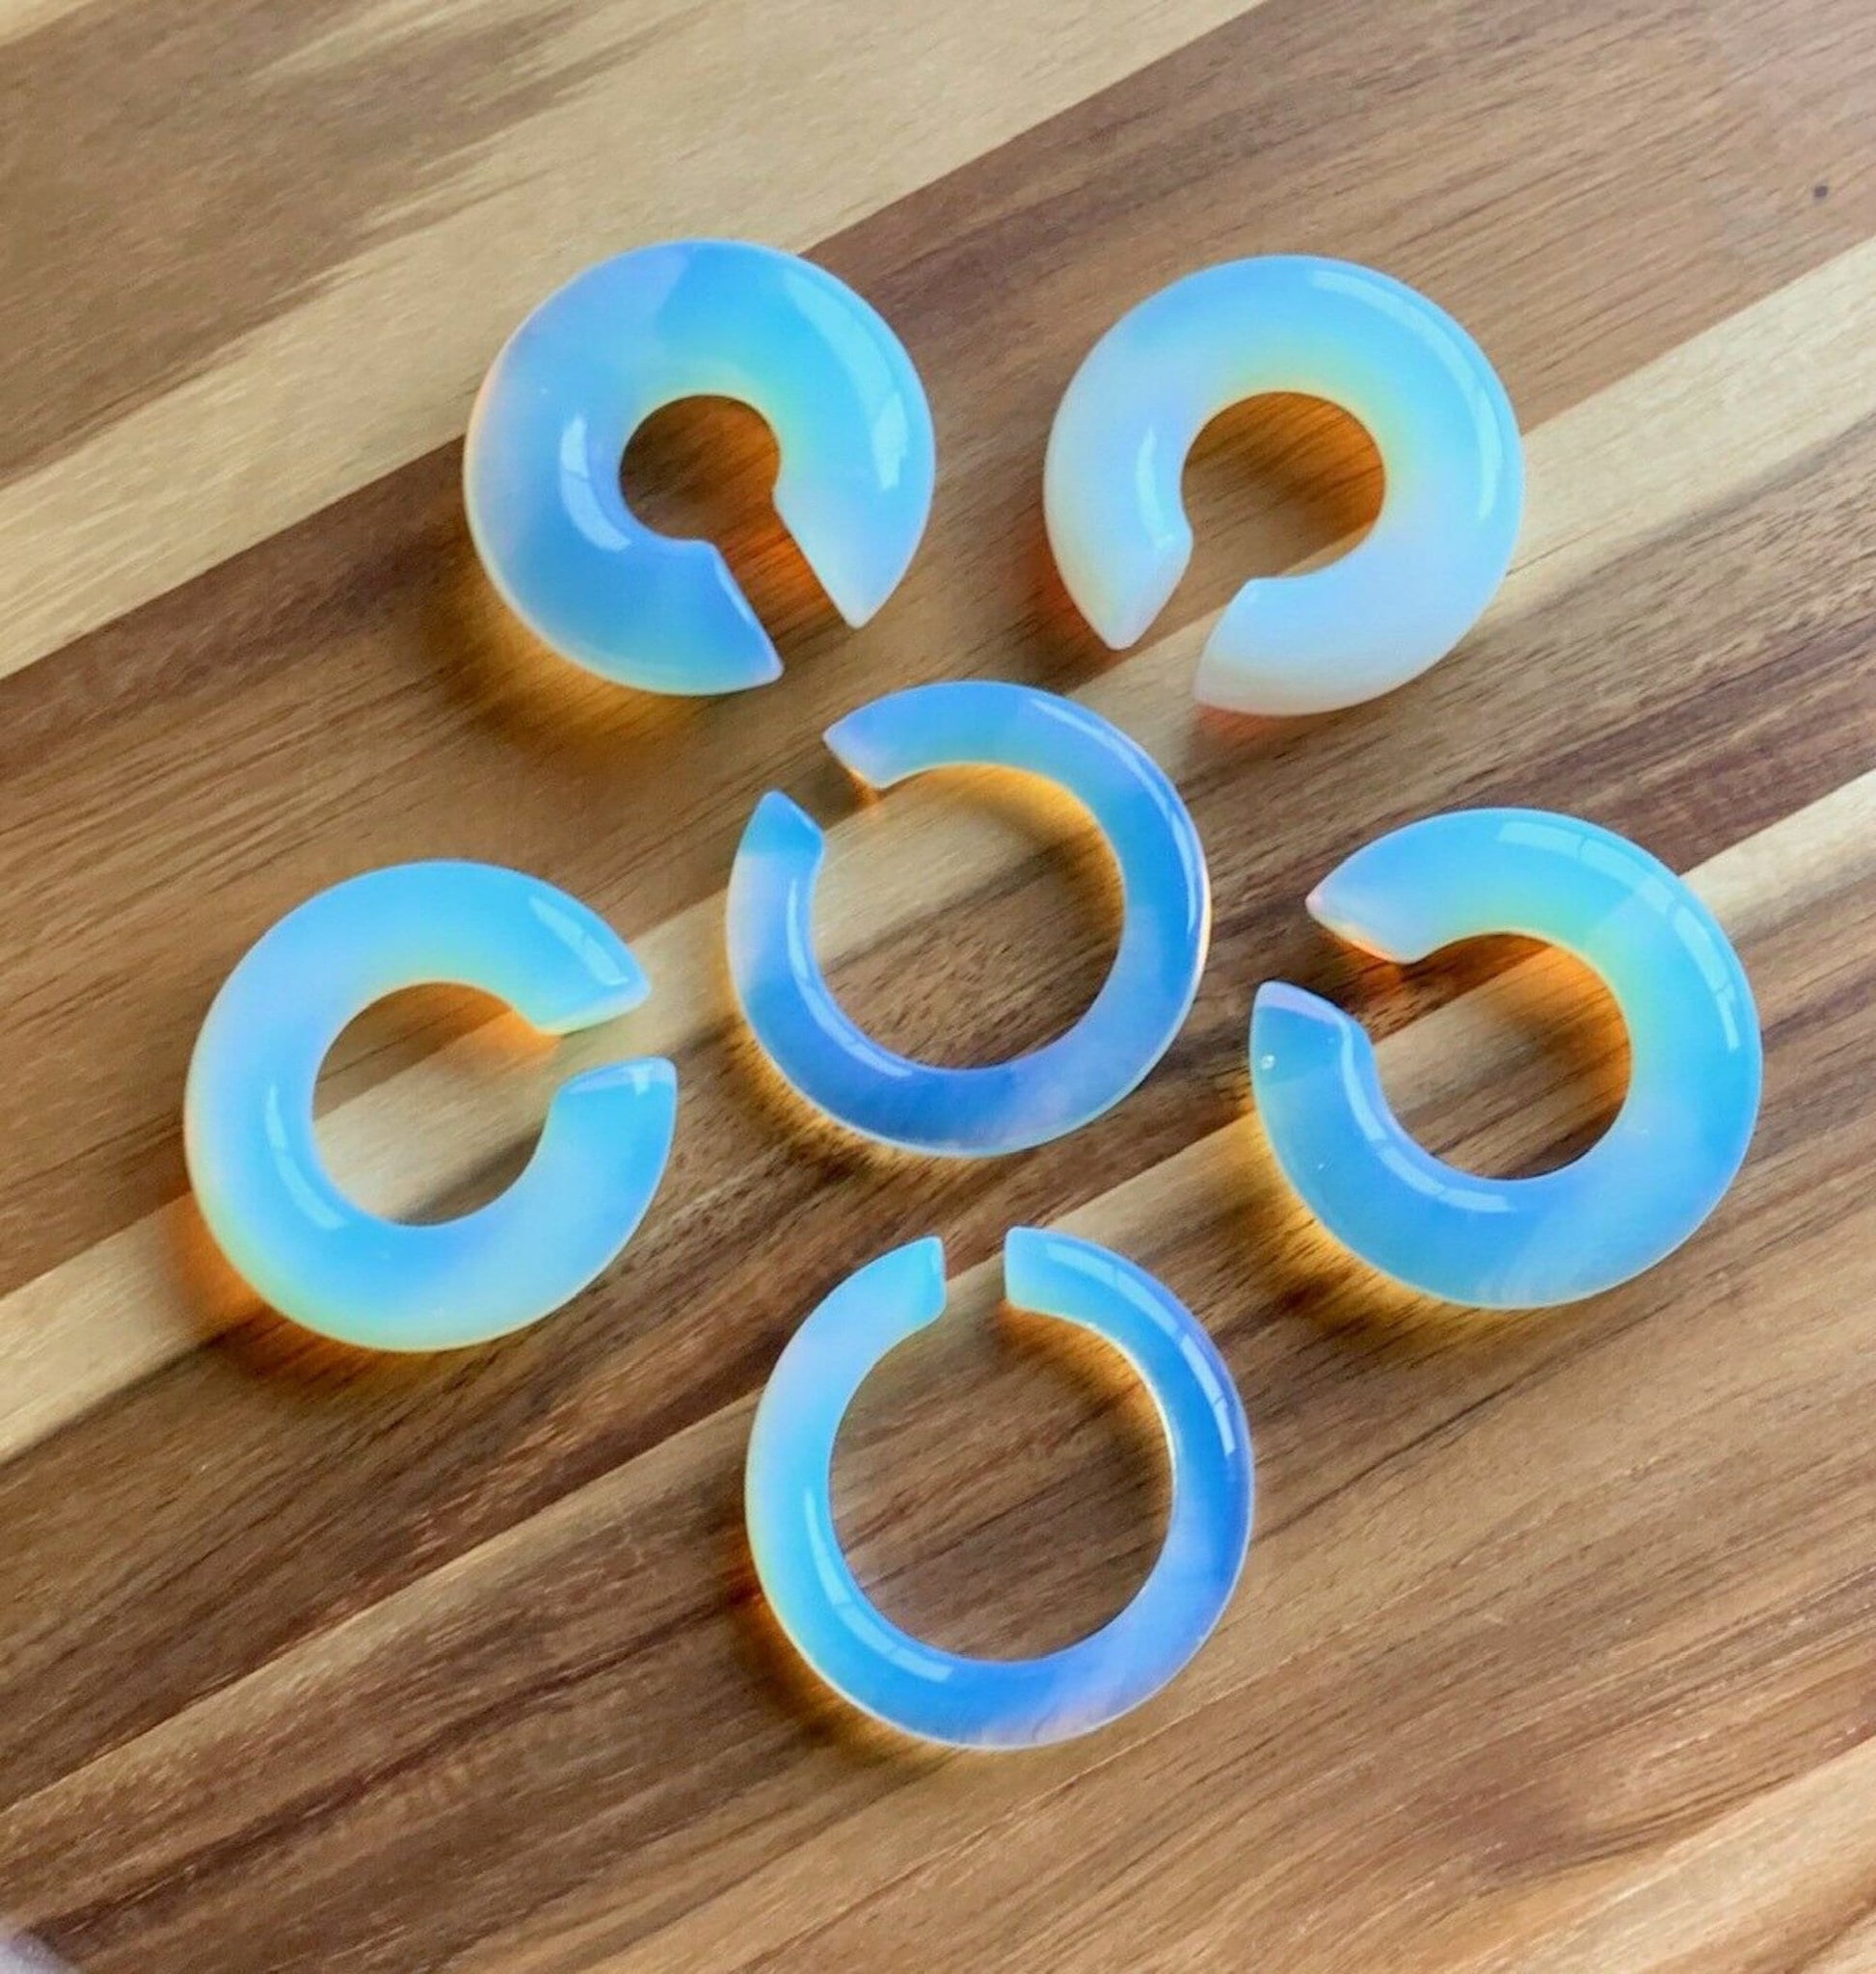 PAIR of Unique Opalite Stone Hoops Ear Weight Hanging Glass Plugs - Gauges 4g (5mm) up to 5/8" (16mm) available!